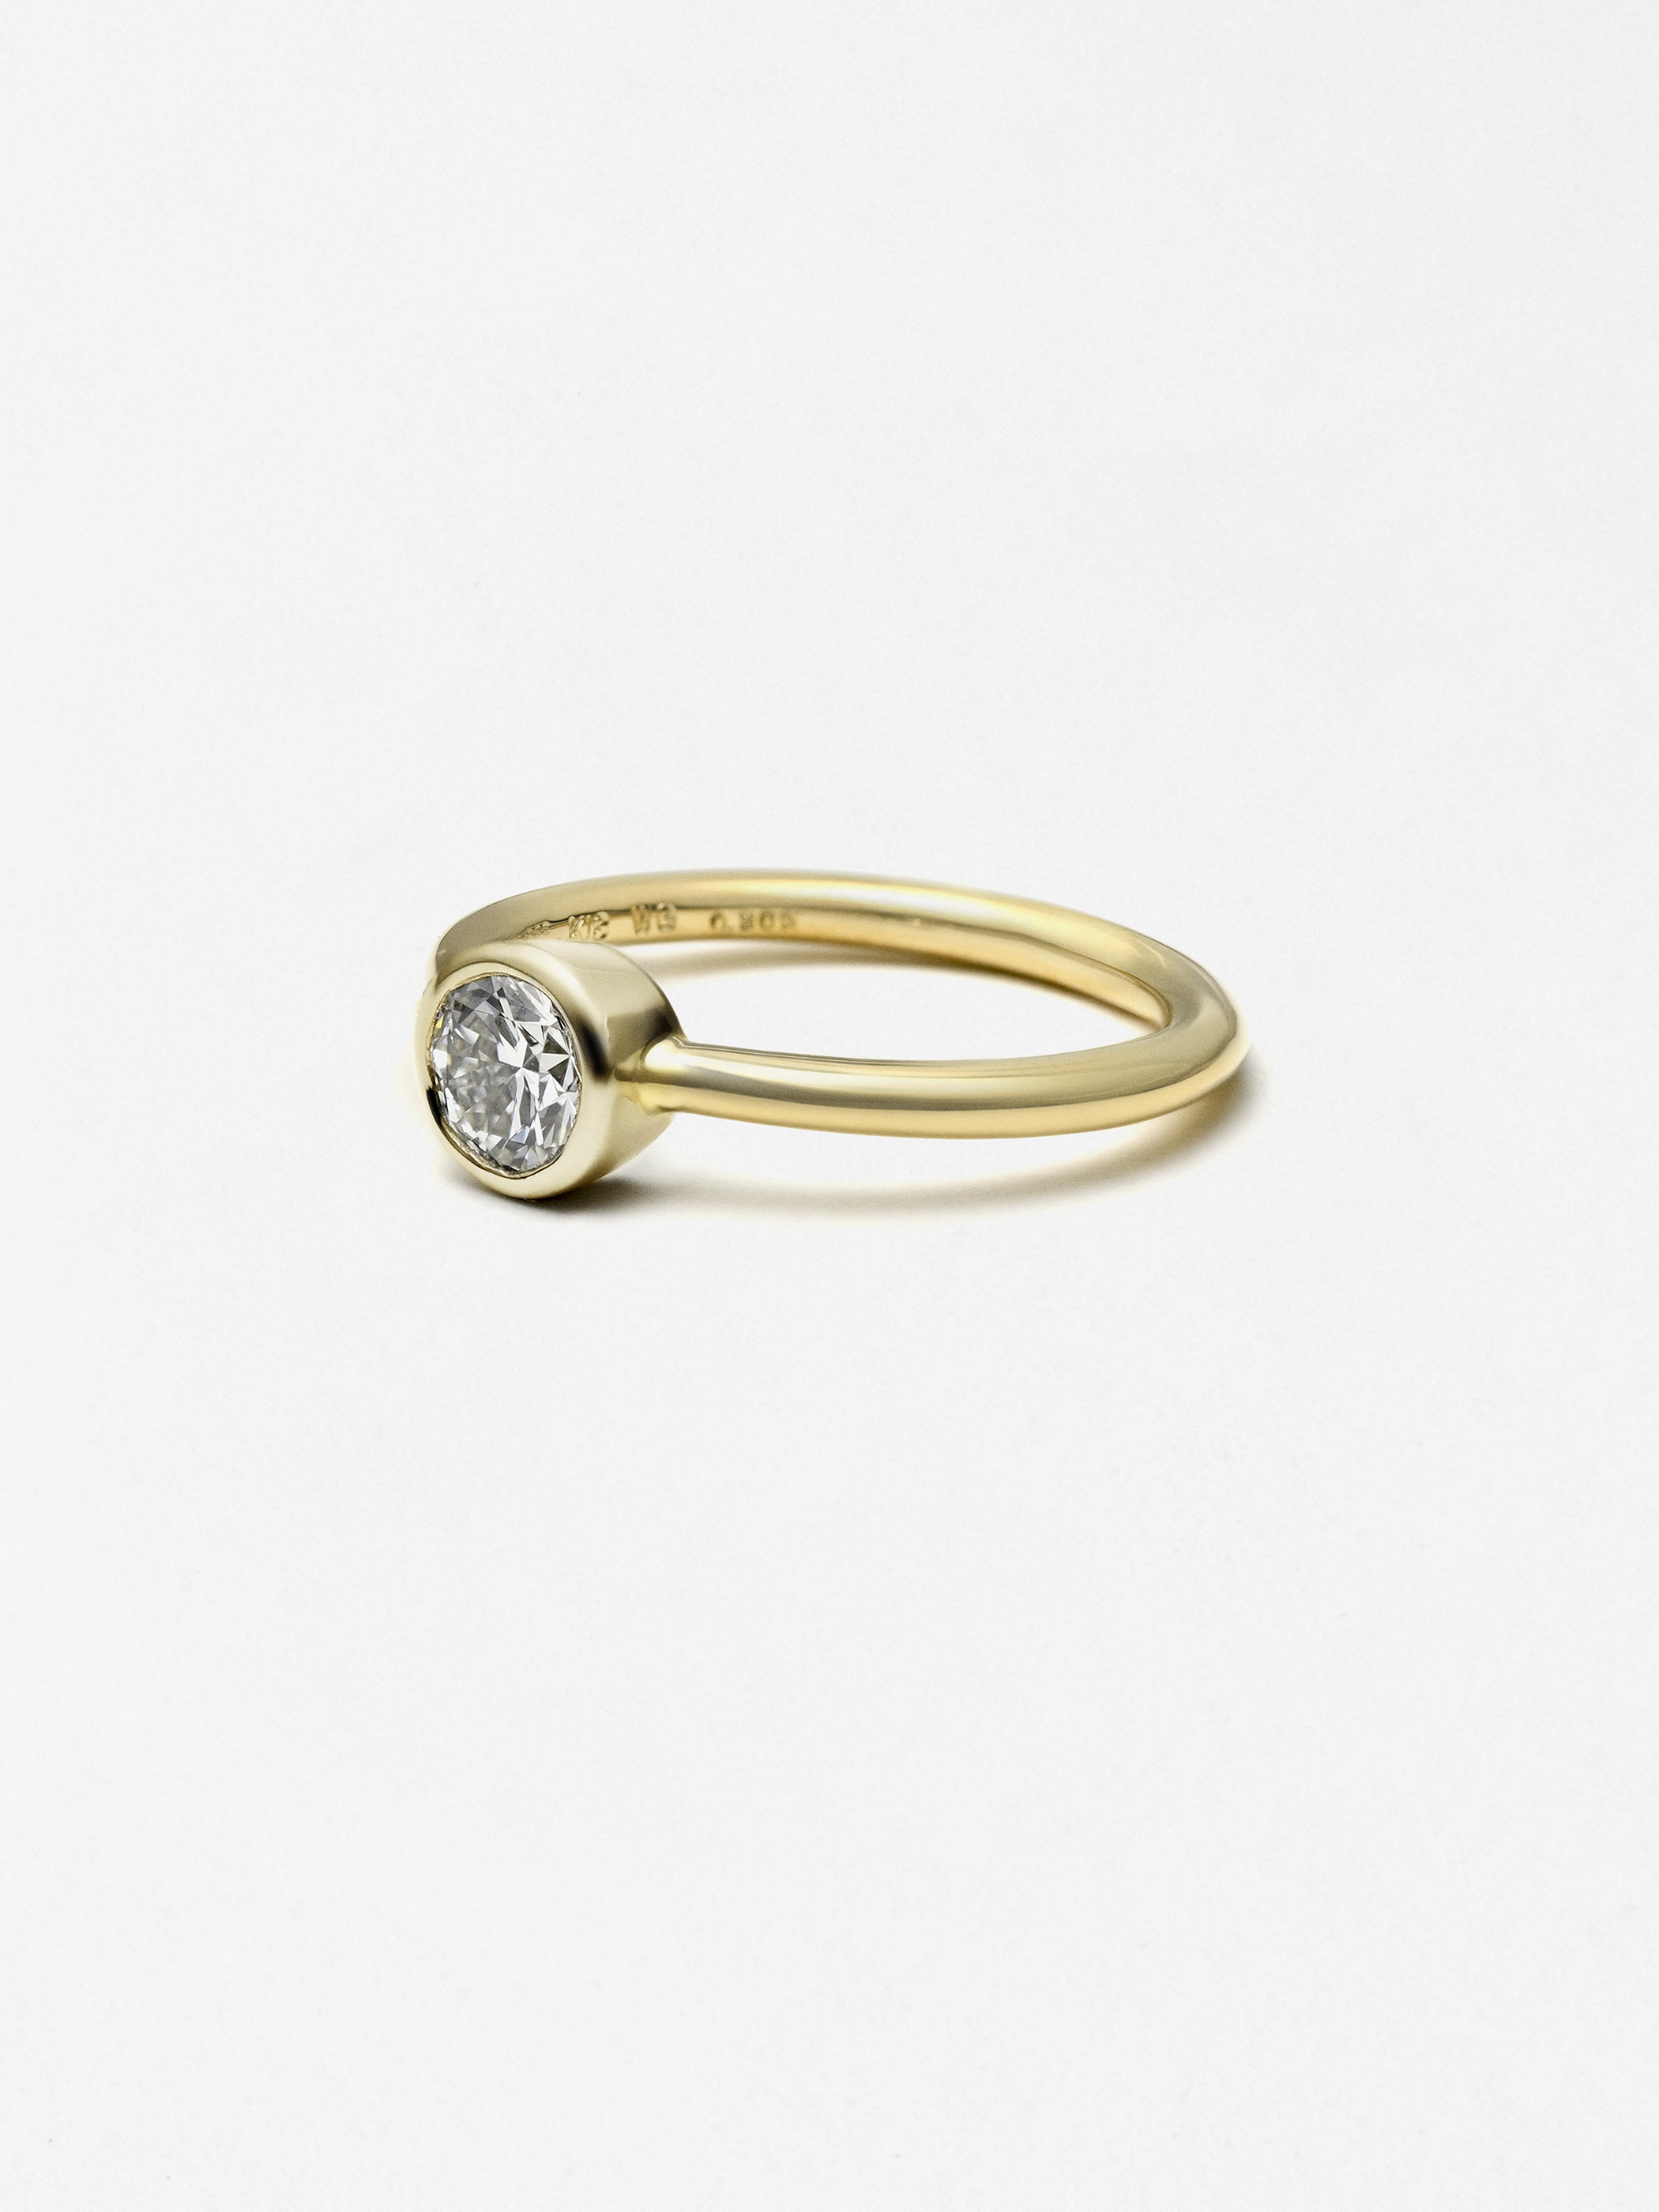 DIAMOND RING SOLITAIRE YG 0.5ct